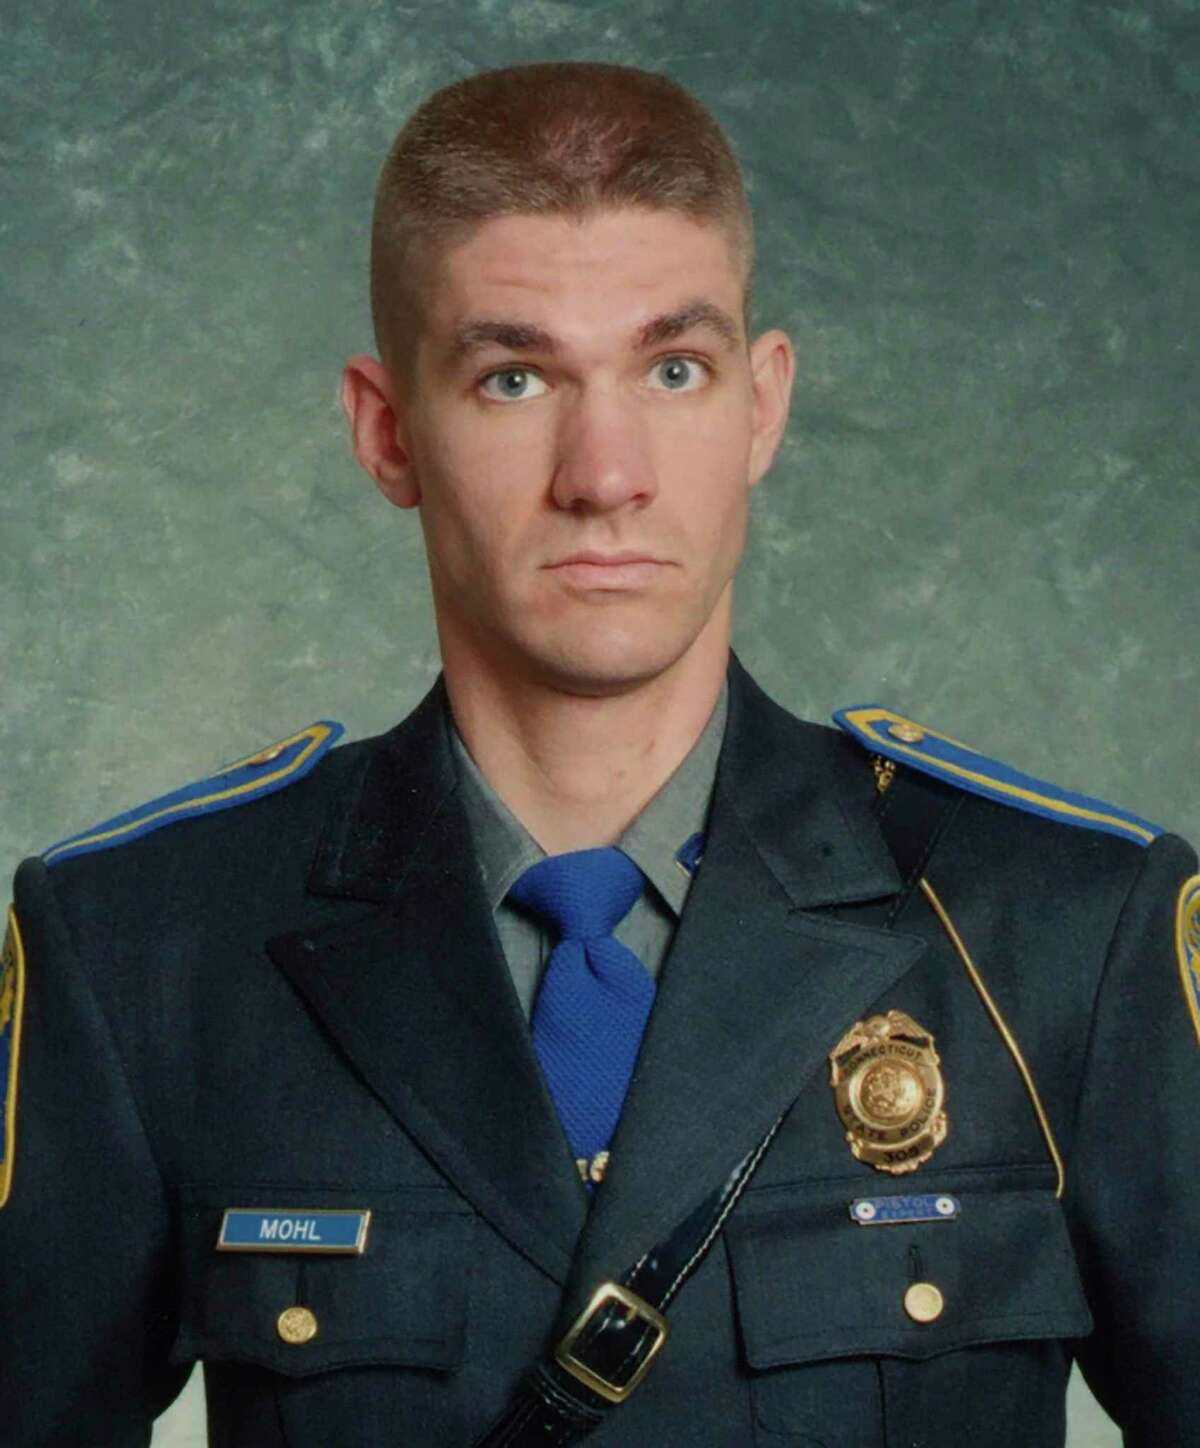 This undated photo provided by the Connecticut State Police shows Sgt. Brian Mohl, a 26-year veteran of their Woodbury department. Mohl called for help about 3:30 a.m. Thursday, Sept. 2, 2021.